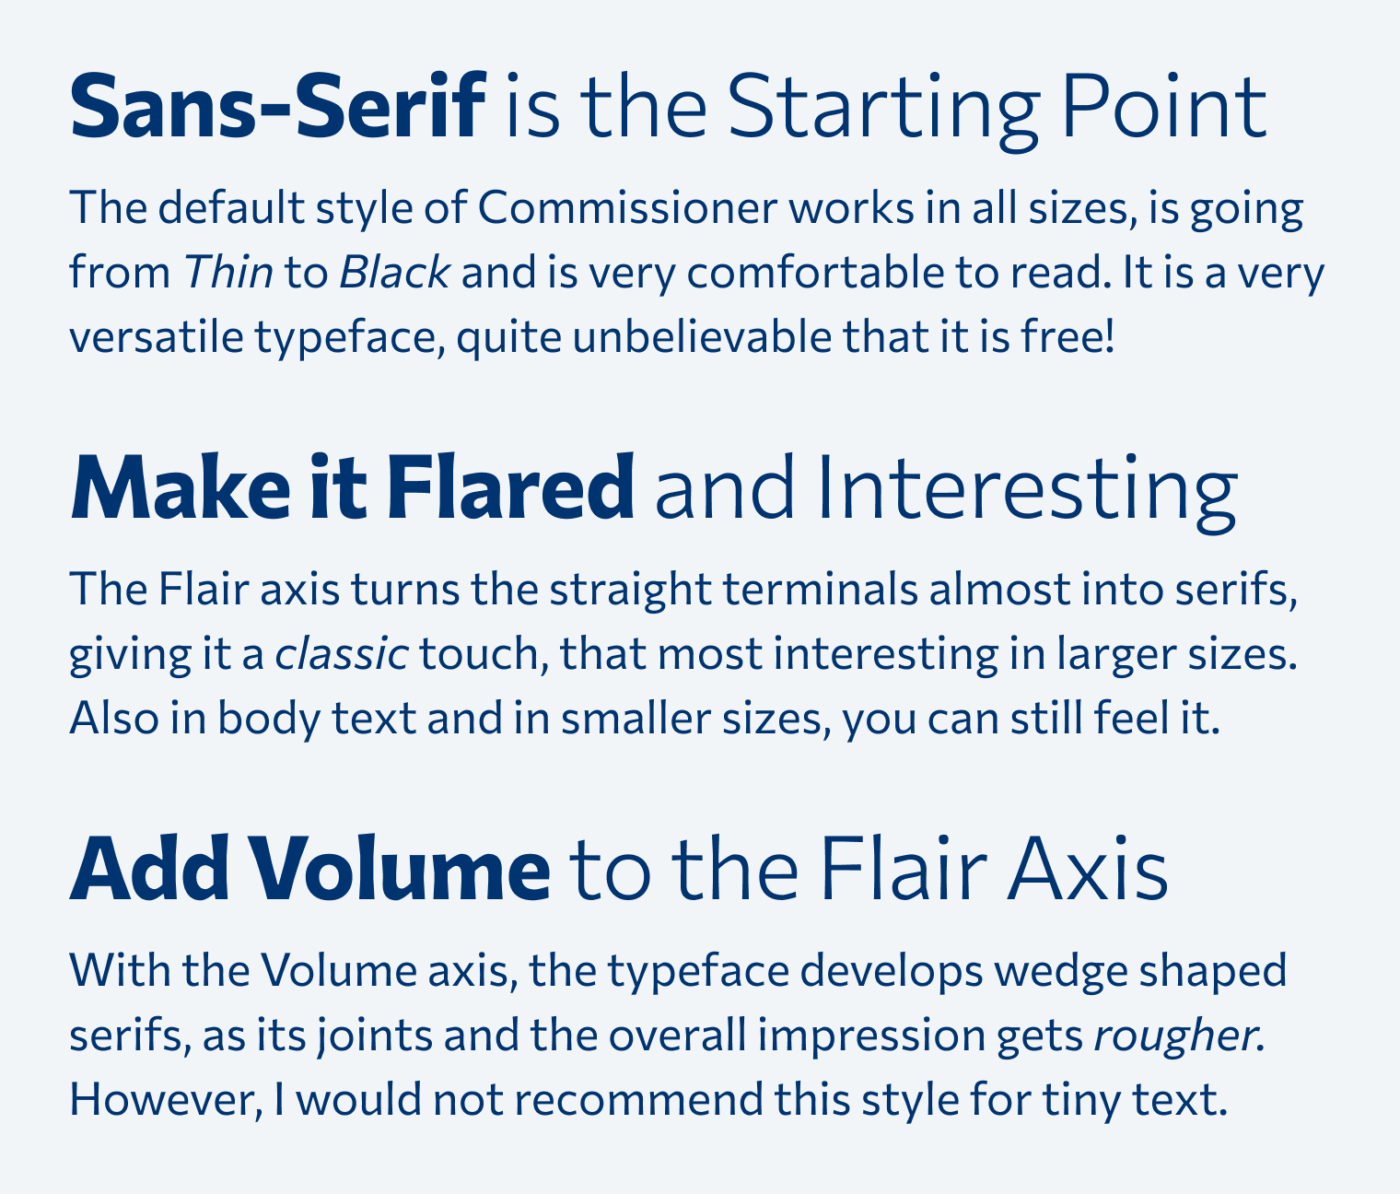 Sans-Serif is the Starting Point. The default style of Commissioner works in all sizes, is going from Thin to Black and is very comfortable to read. It is a very versatile typeface, quite unbelievable that it is free!

Make it Flared and Interesting. The Flare axis turns the straight terminals almost into serifs, giving it a classic touch, that most interesting in larger sizes. Also in body text and in smaller sizes, you can still feel it.

Add Volume to the Flare Axis. With the Volume axis, the typeface develops wedge shaped serifs, as its joints and the overall impression gets rougher. However, I would not recommend this style for tiny text.